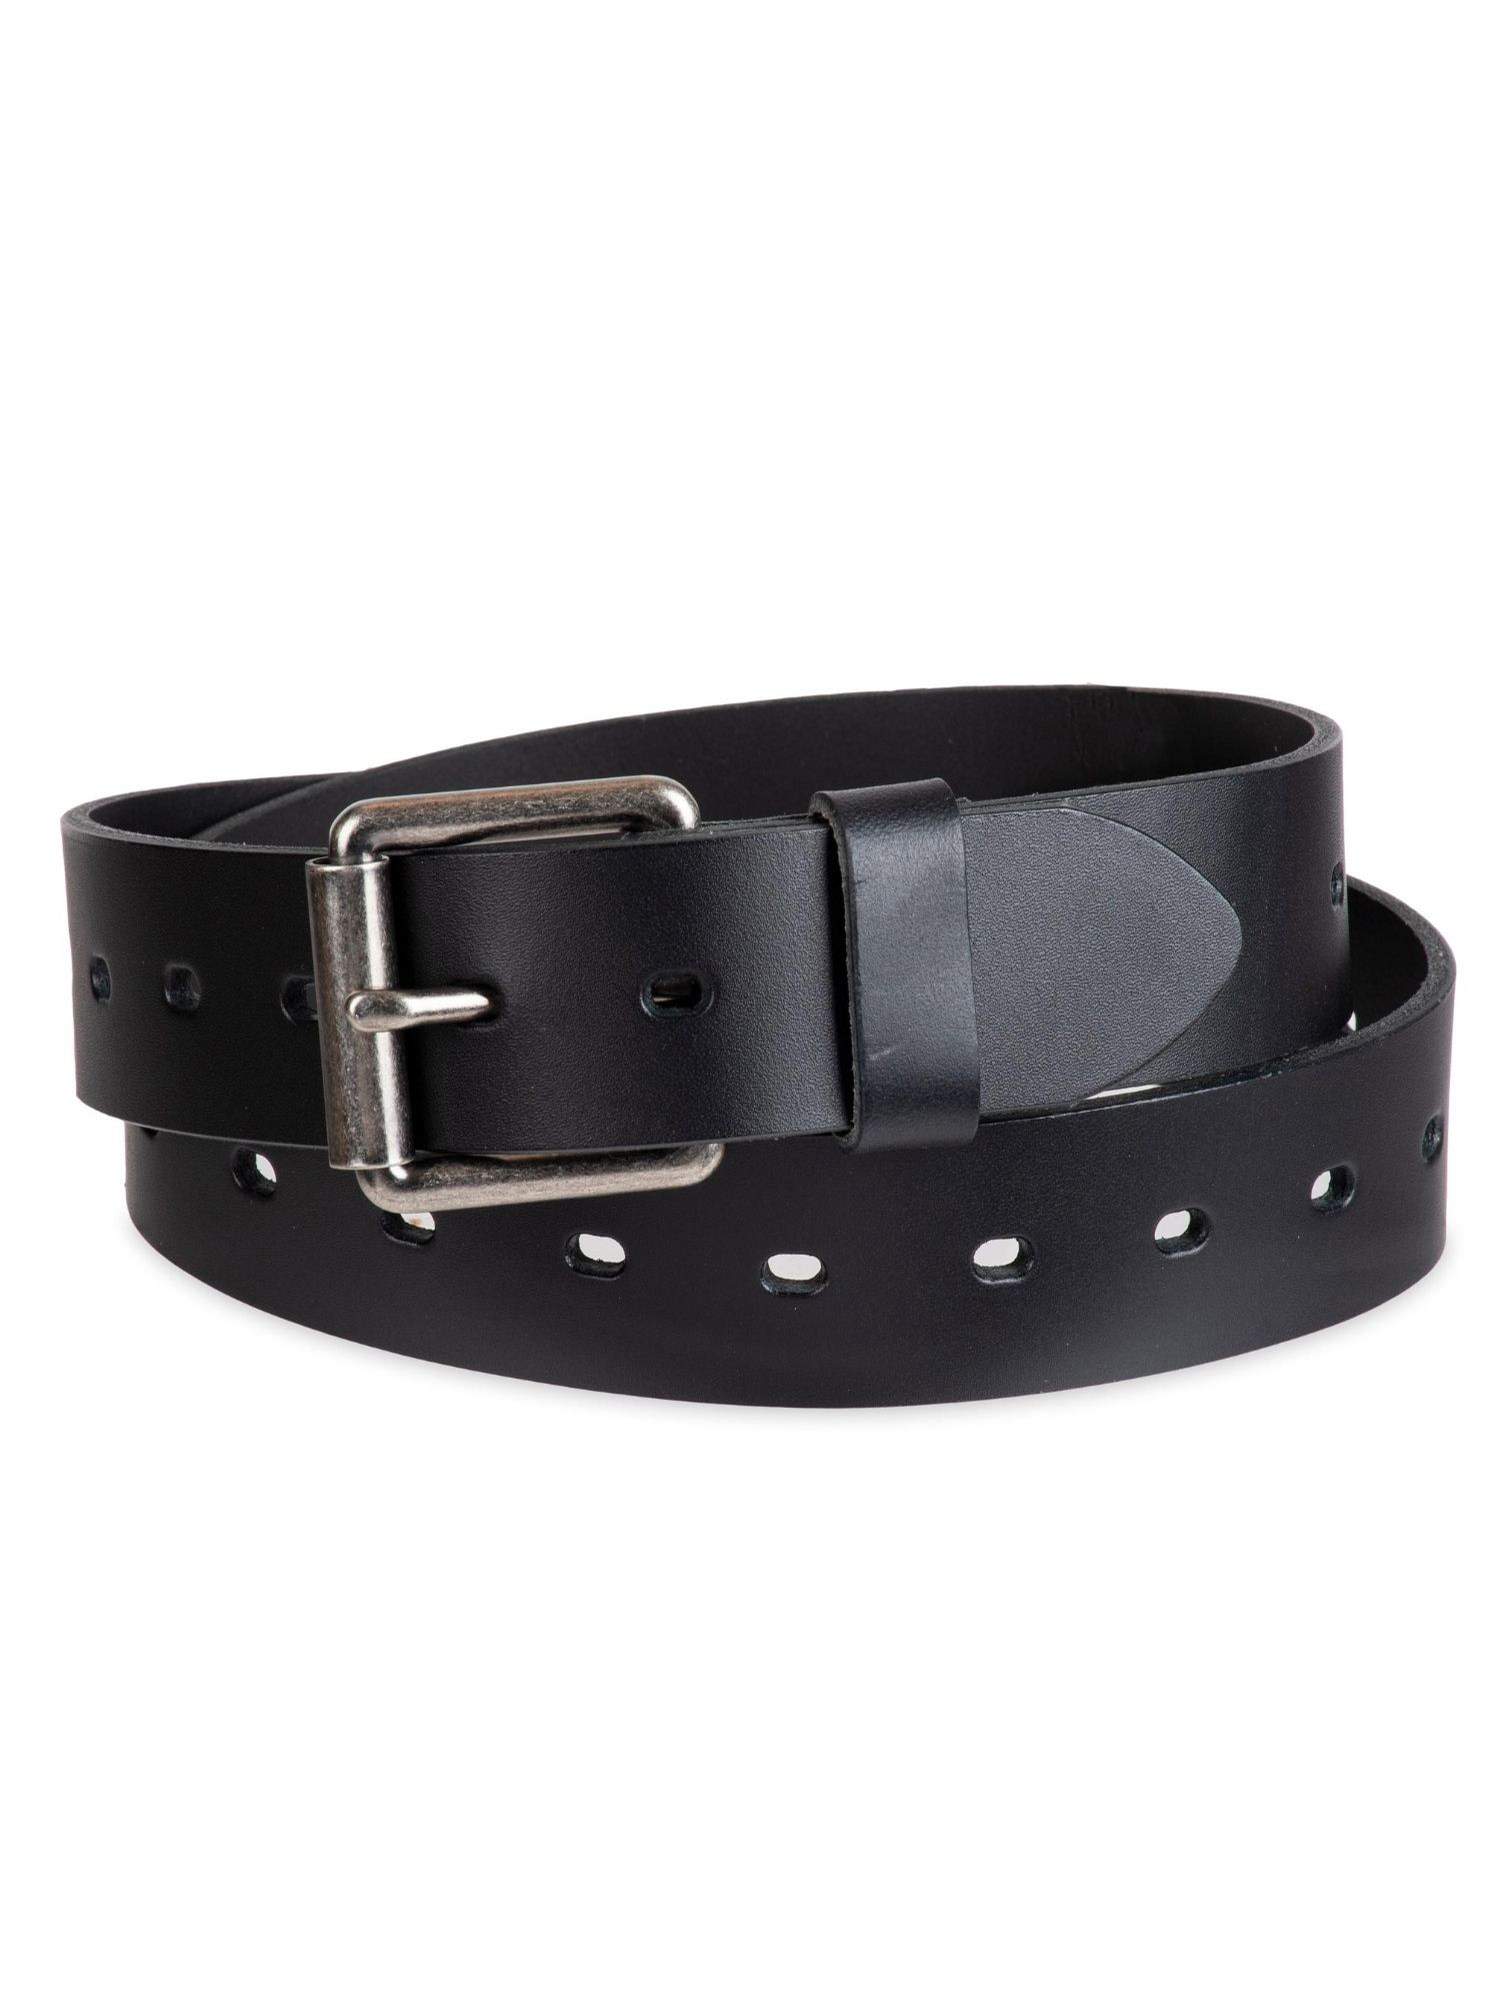 Genuine Dickies Men's Black Fully Adjustable Perforated Leather Belt (Regular and Big & Tall Sizes) - image 1 of 6